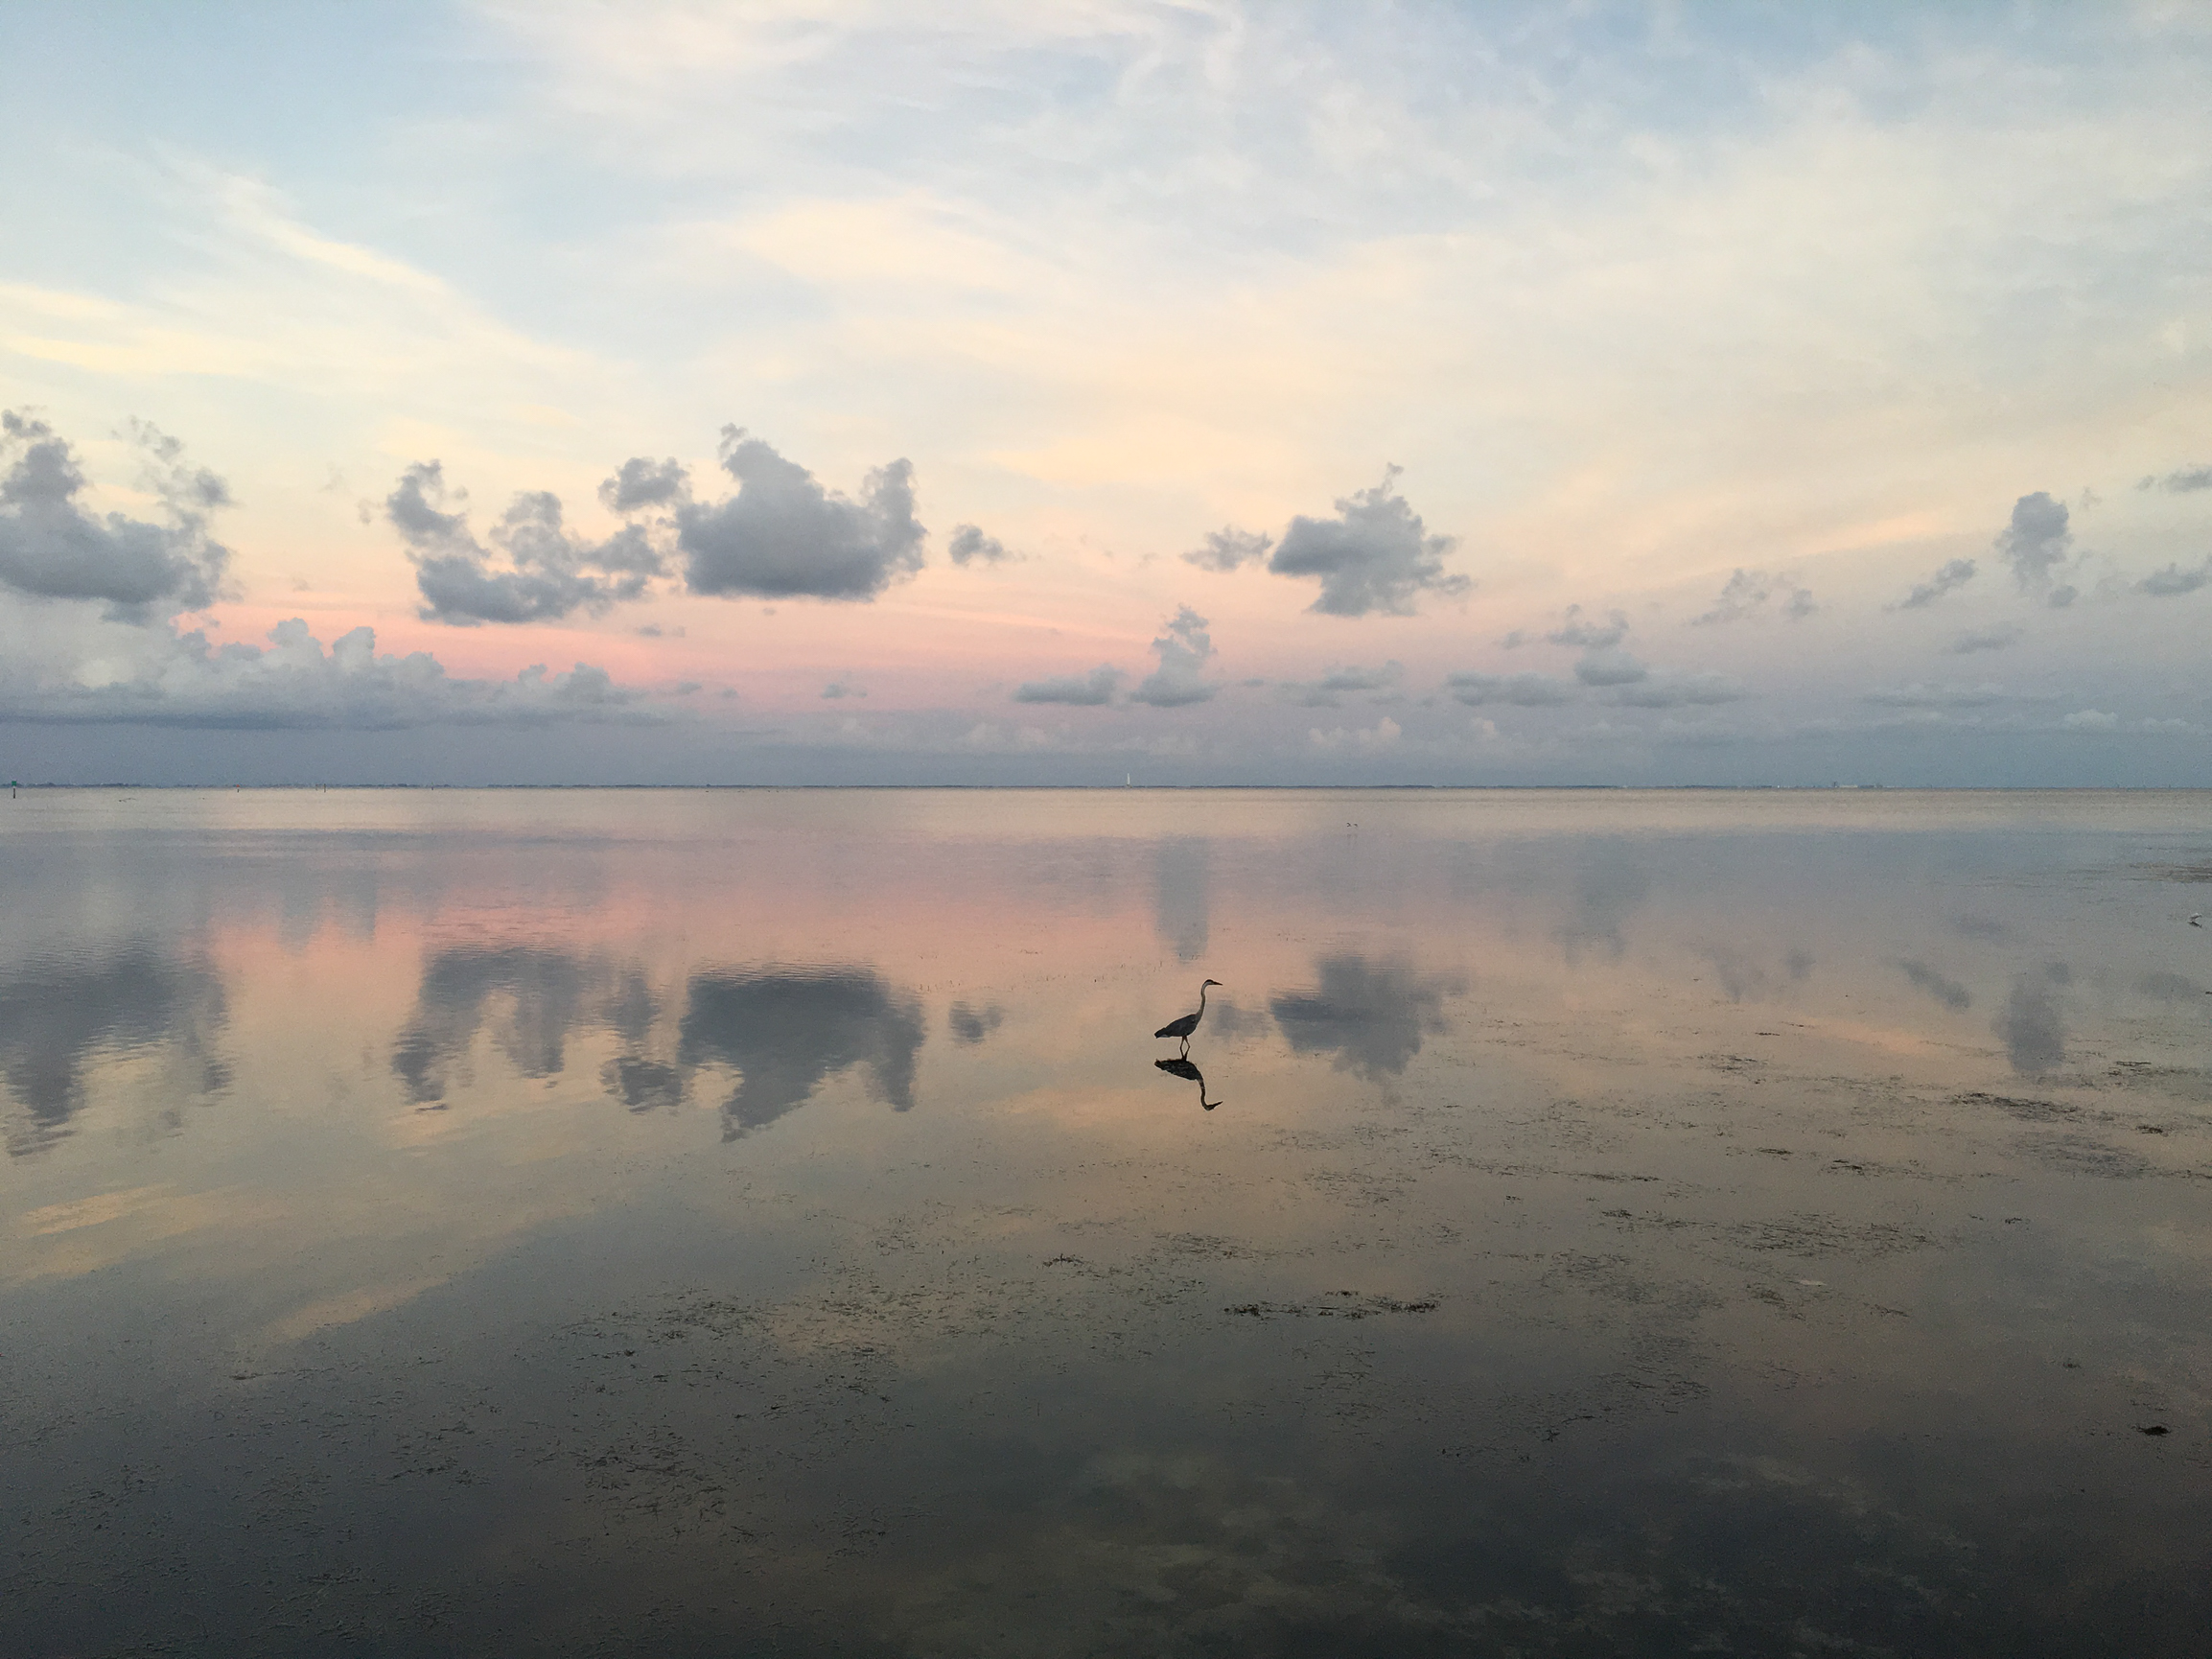 A lone egret steps carefully at sunset, the pink glow and clouds reflected in the still water.